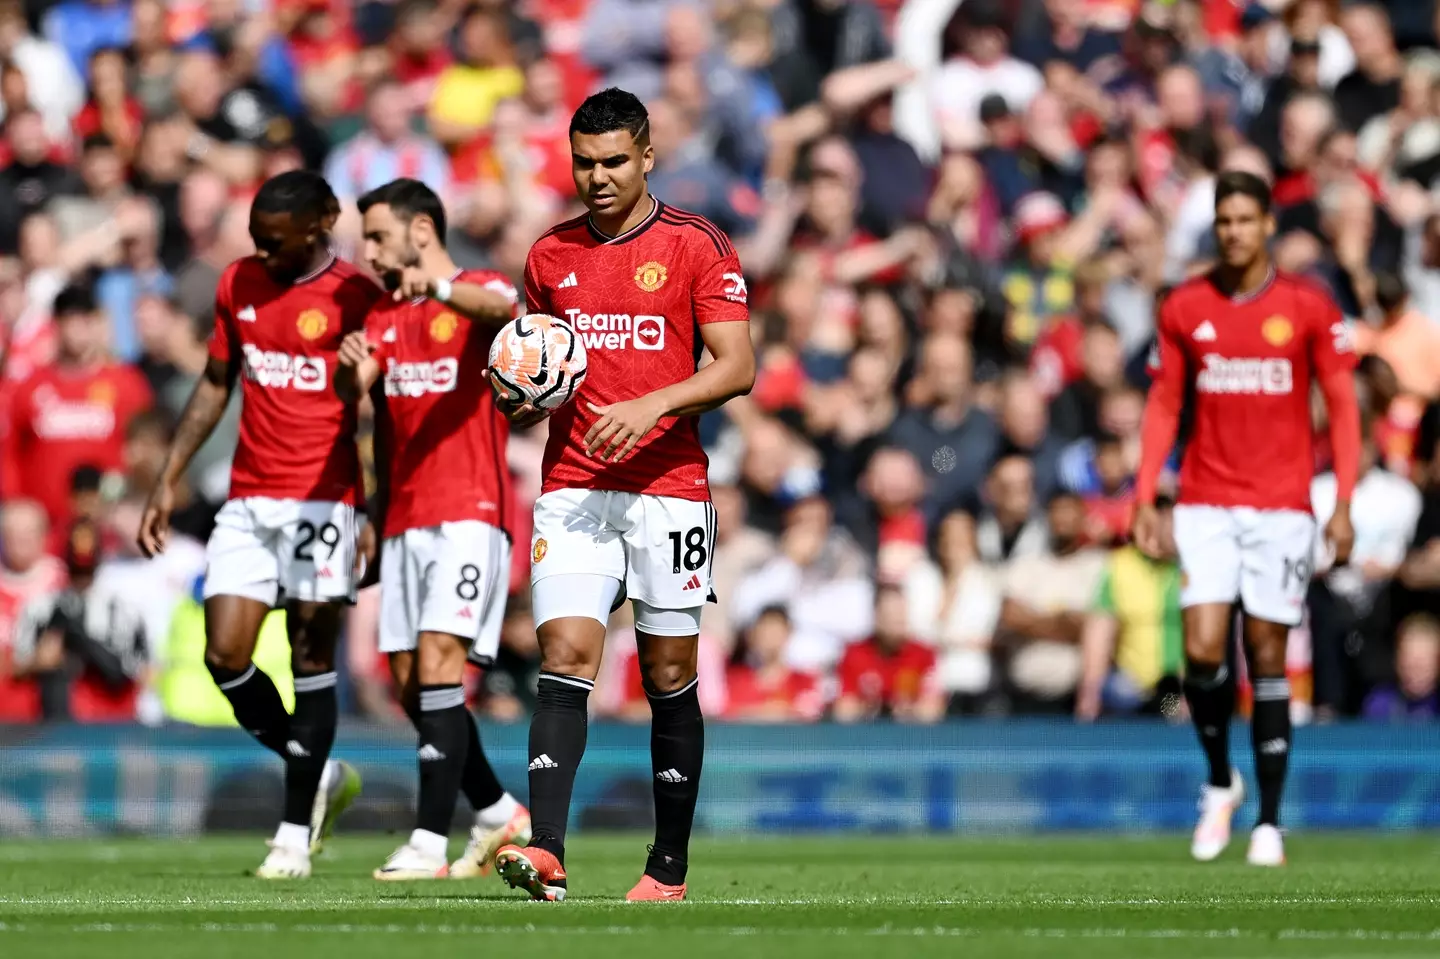 Casemiro has missed a glorious chance to equalise for Man United against Nottingham Forest (